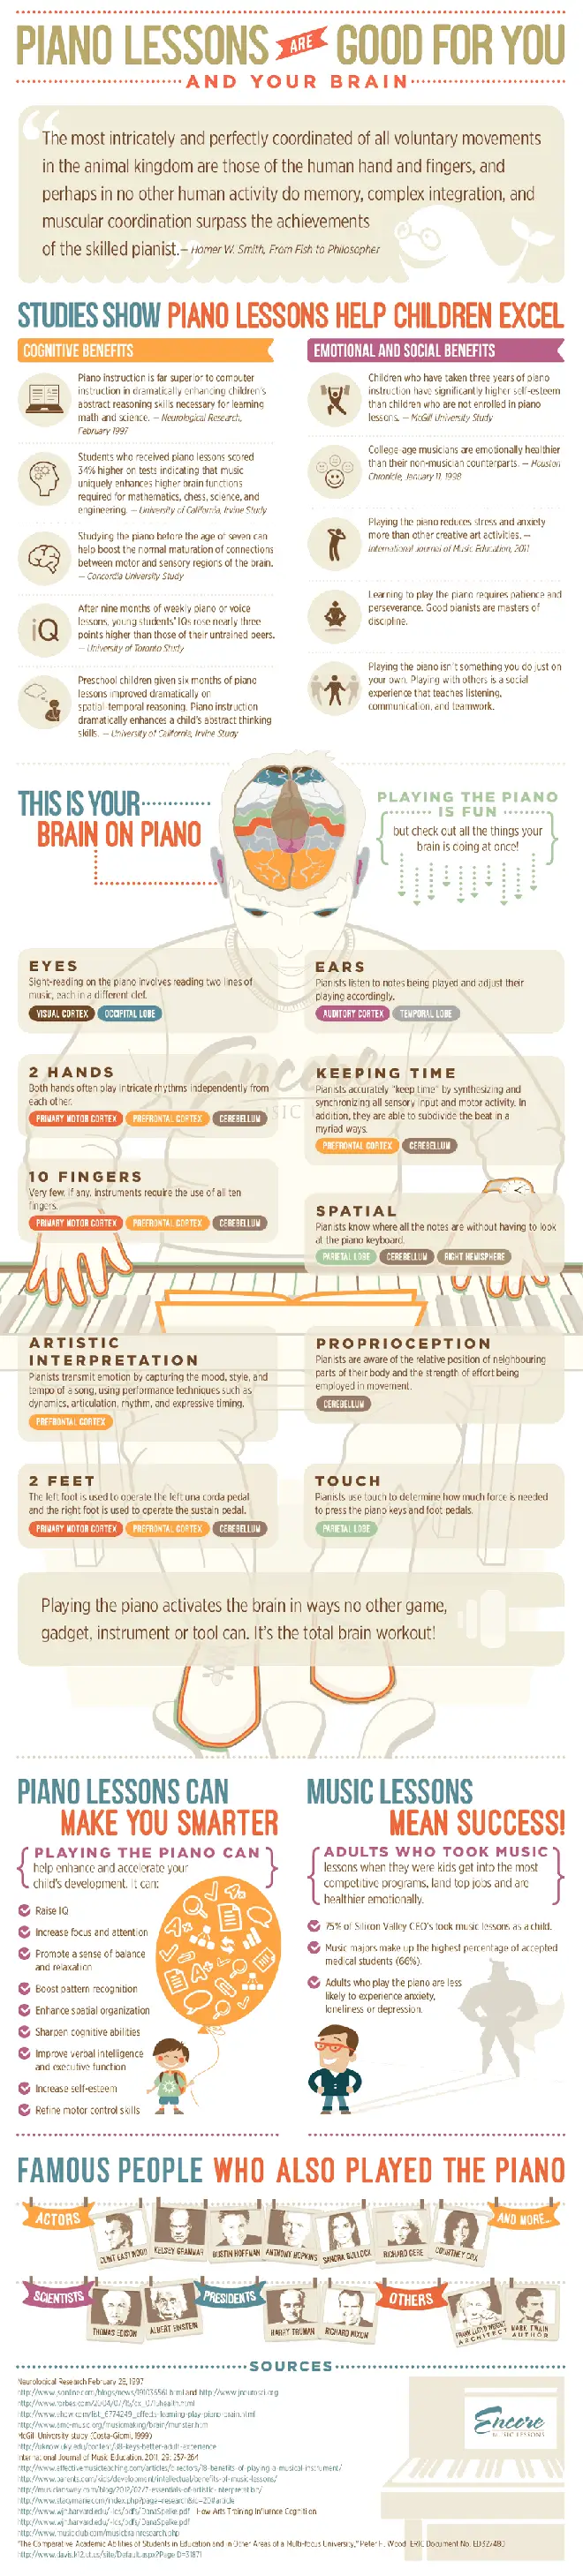 How piano lessons help